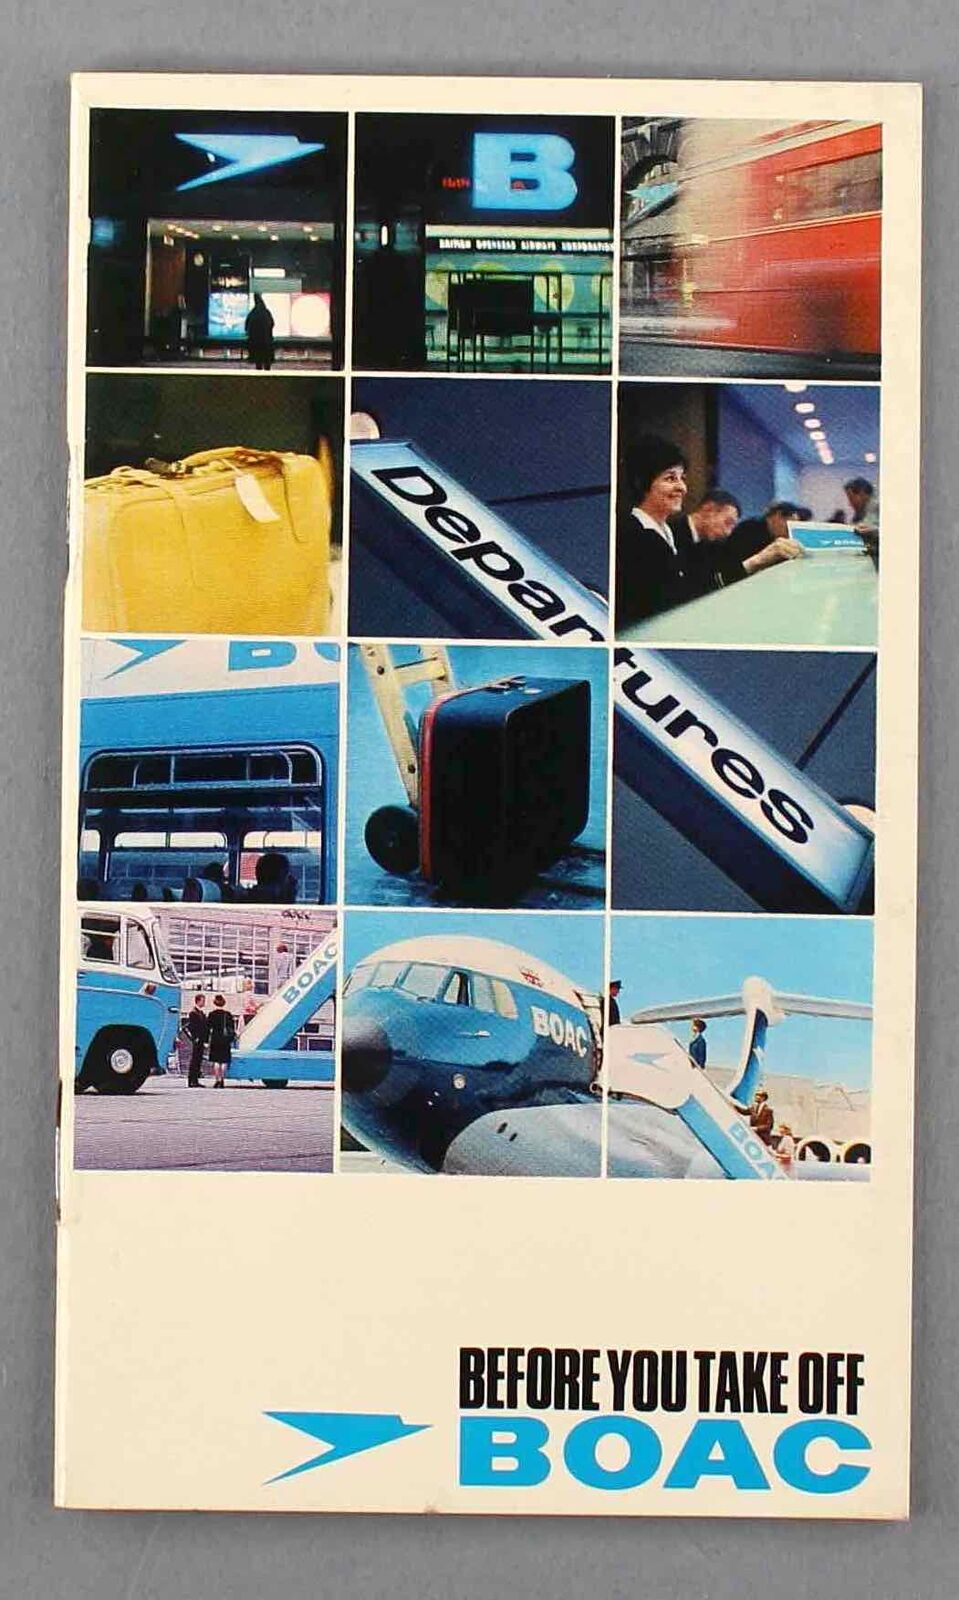 BOAC BEFORE YOU TAKE OFF VINTAGE AIRLINE BROCHURE 1968 B.O.A.C.